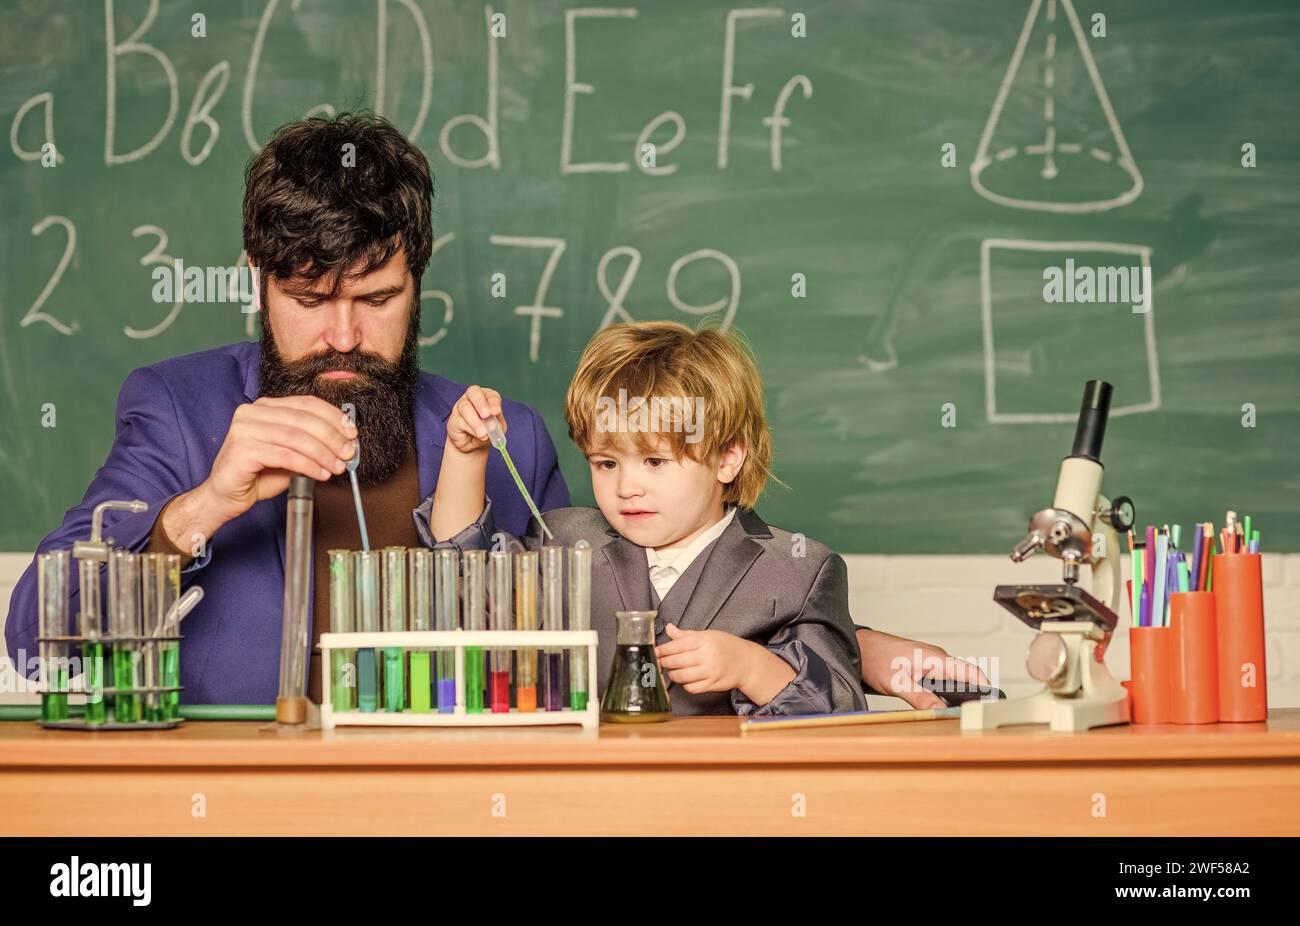 Perseverance pays off. Chemical experiment. Symptoms of ADHD at school. Educational school program. Schoolboy cute child experimenting with liquids Stock Photo